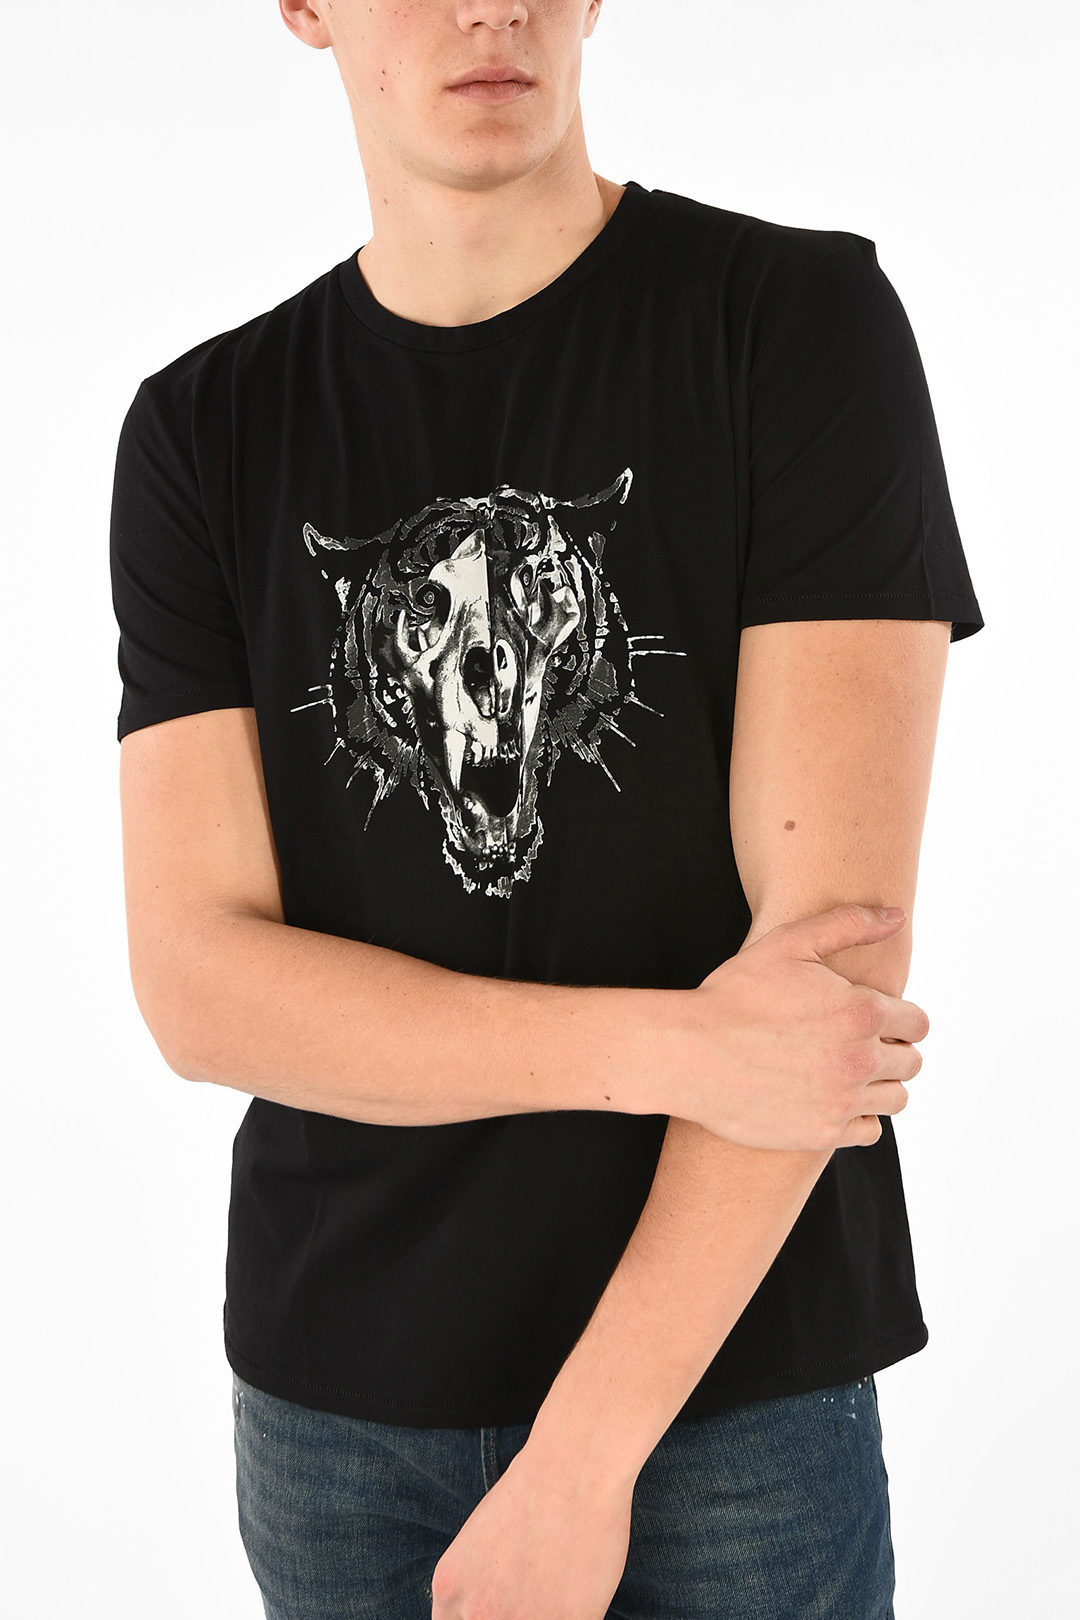 Just Cavalli Embroidered Tiger Tee Black W Blue $190-Now $72 